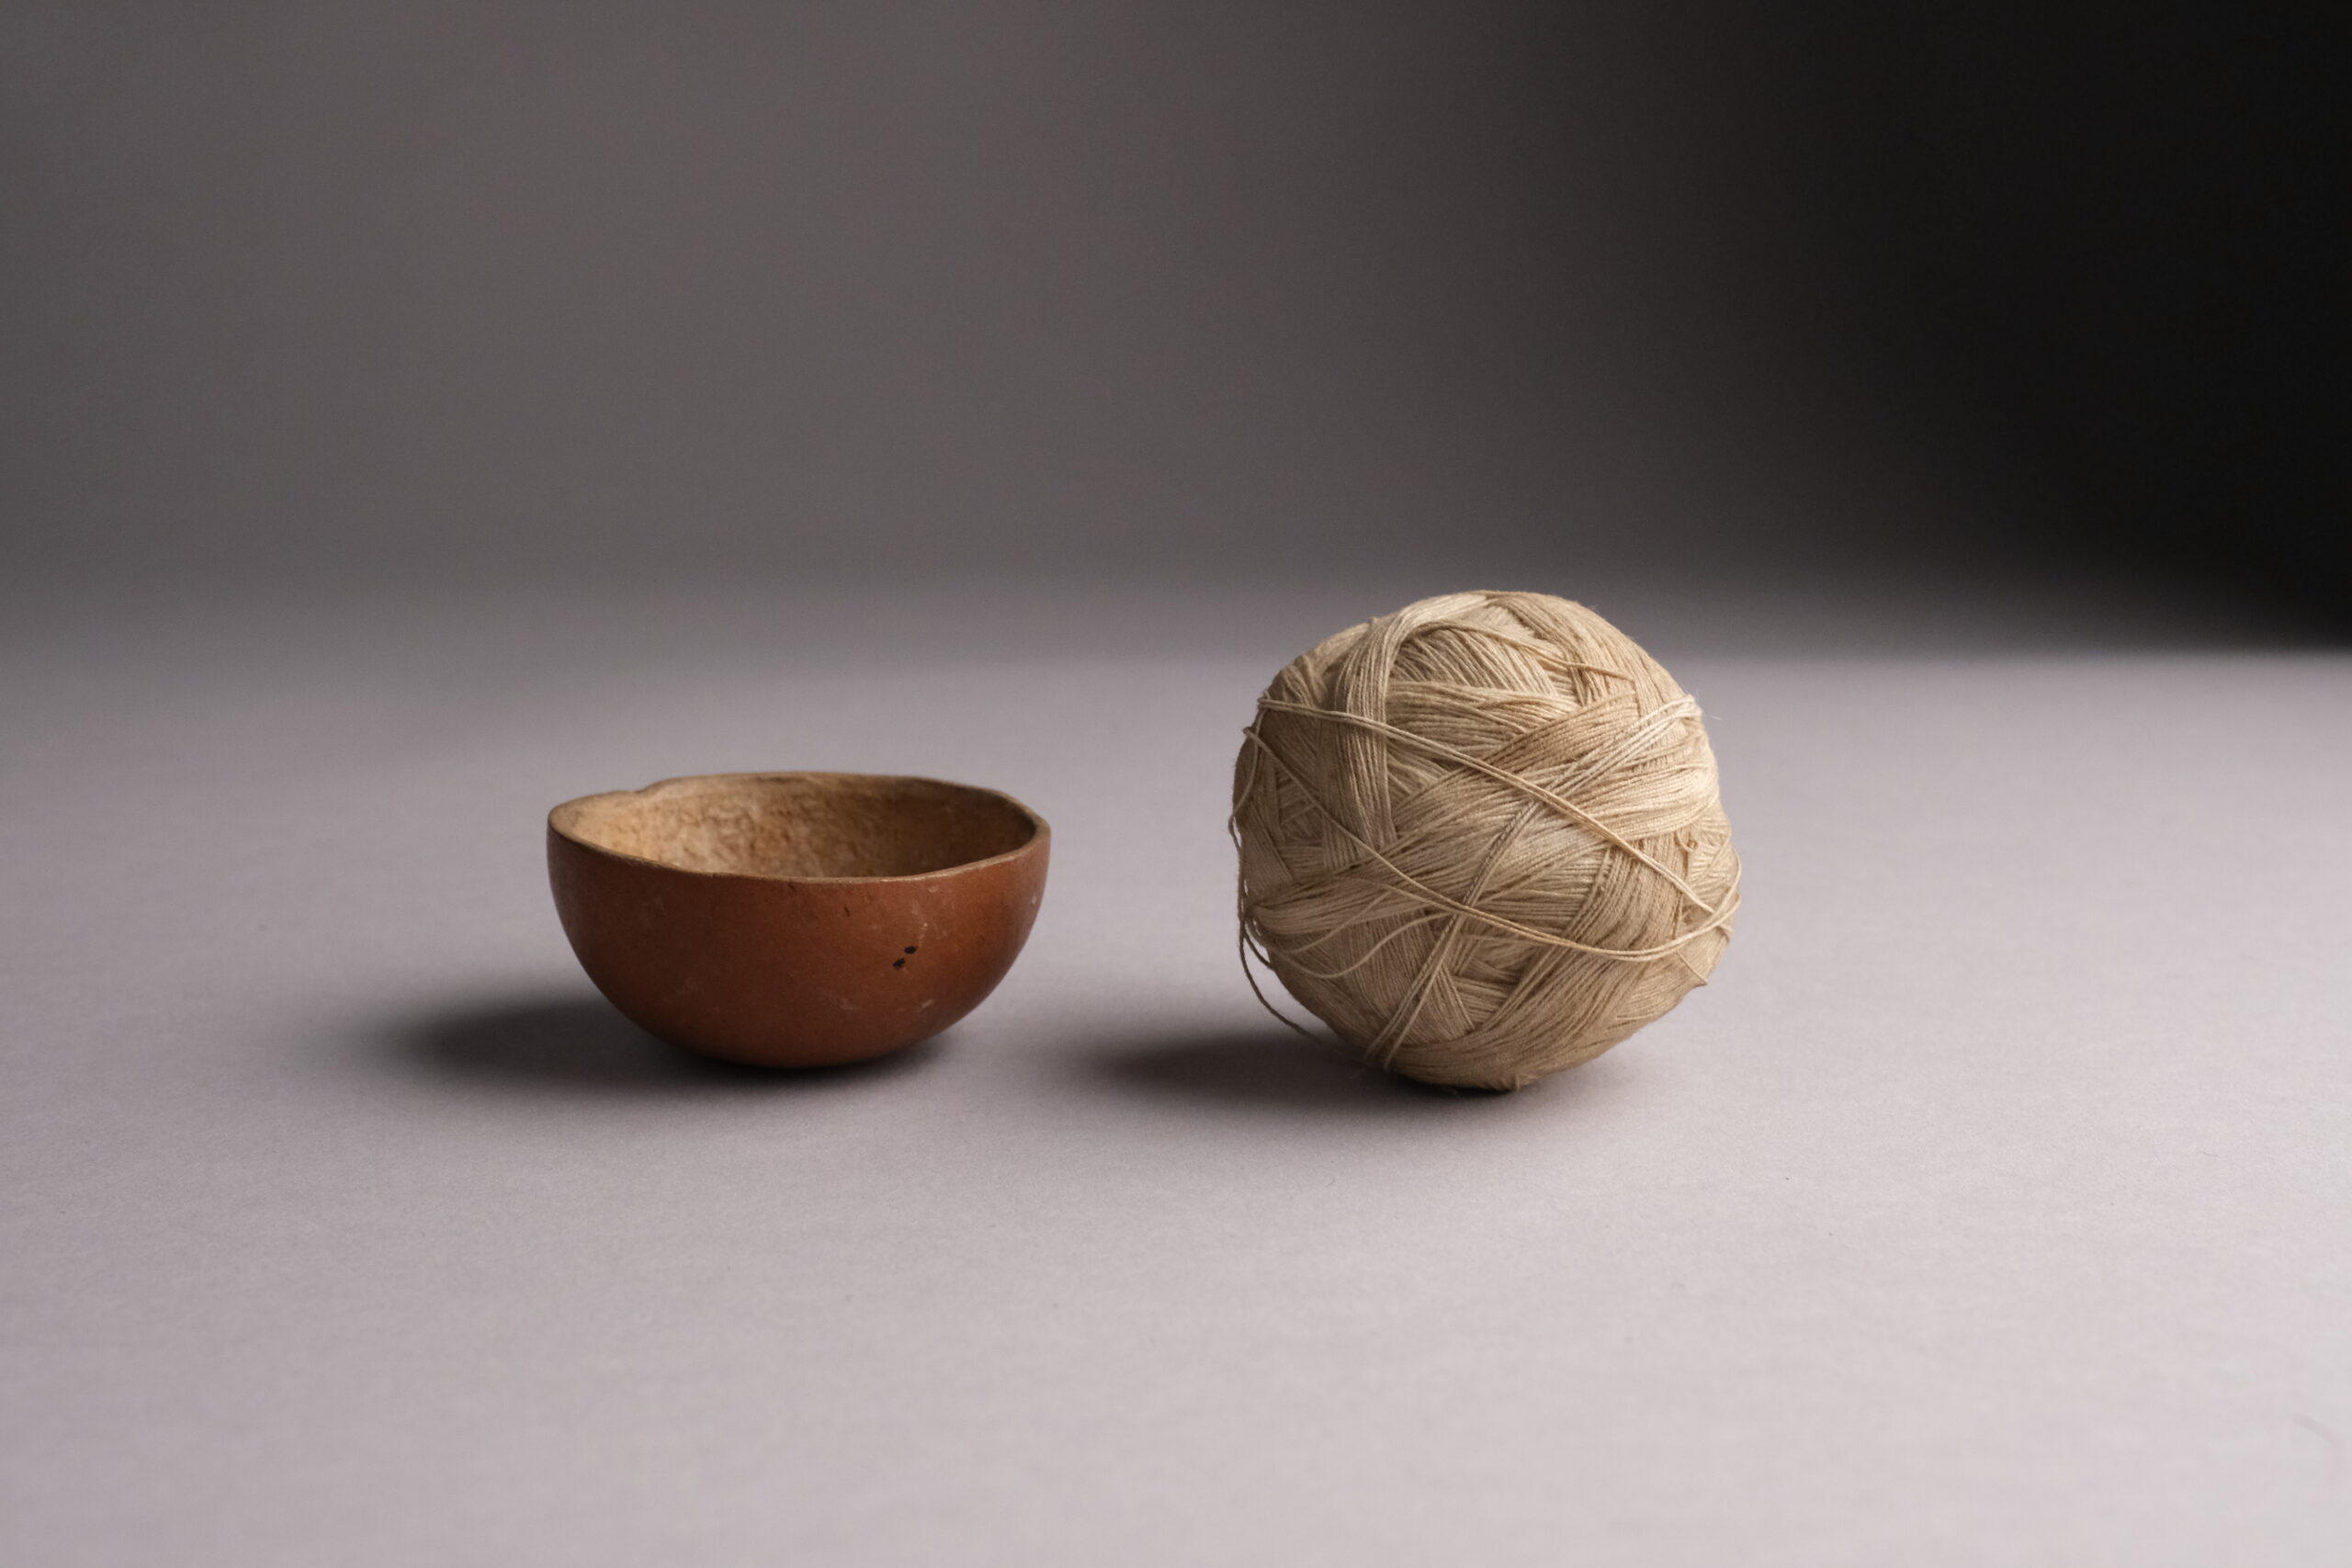 Cotton thread ball and gourd container, Q80.346